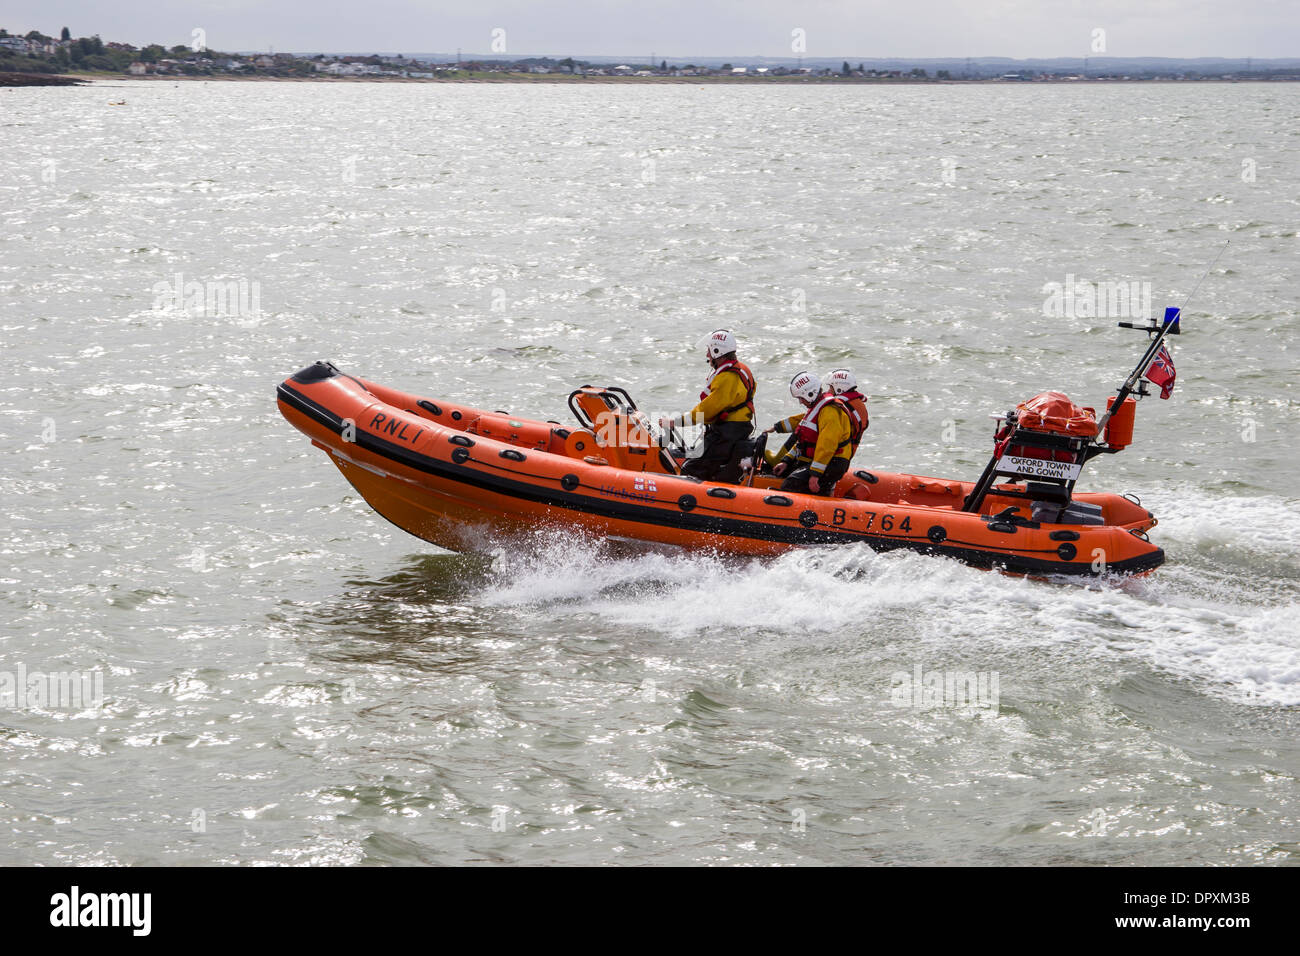 Inshore Inflatable Lifeboat Rescue Launch Whitstable Stock Photo